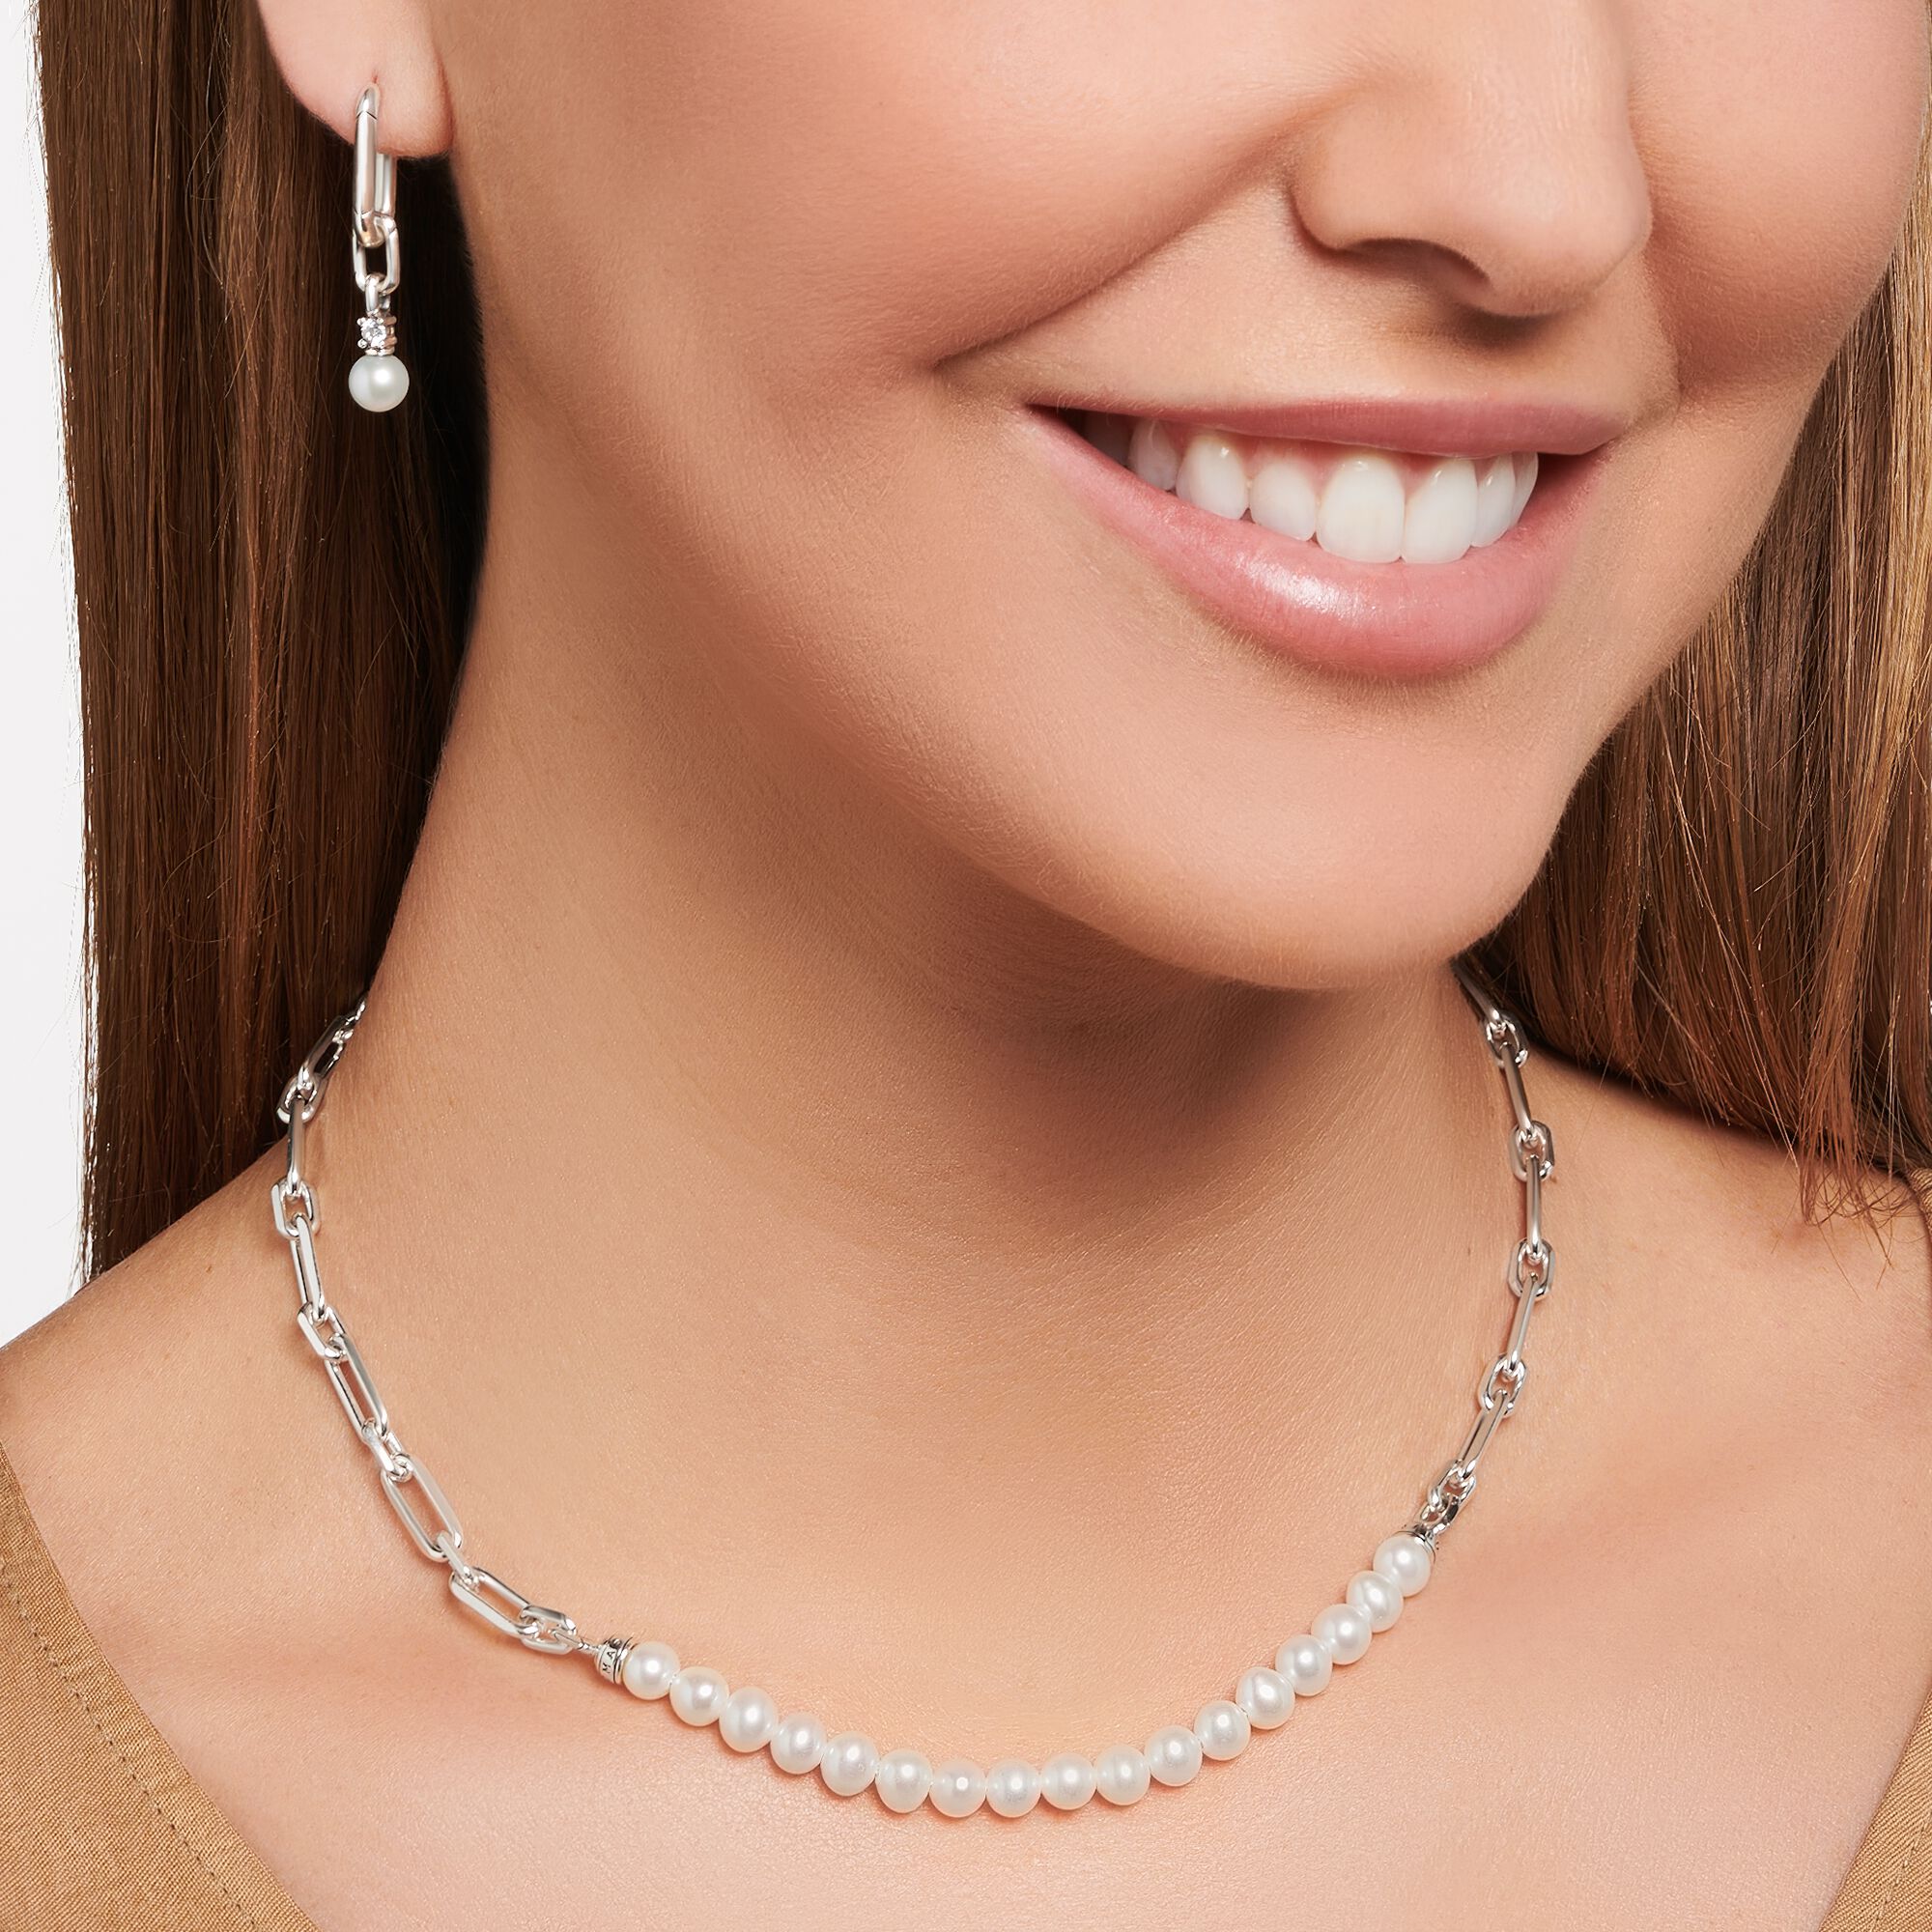 Thomas Sabo Sterling Silver Chain Links and Pearl Necklace worn by a woman with matching earrings